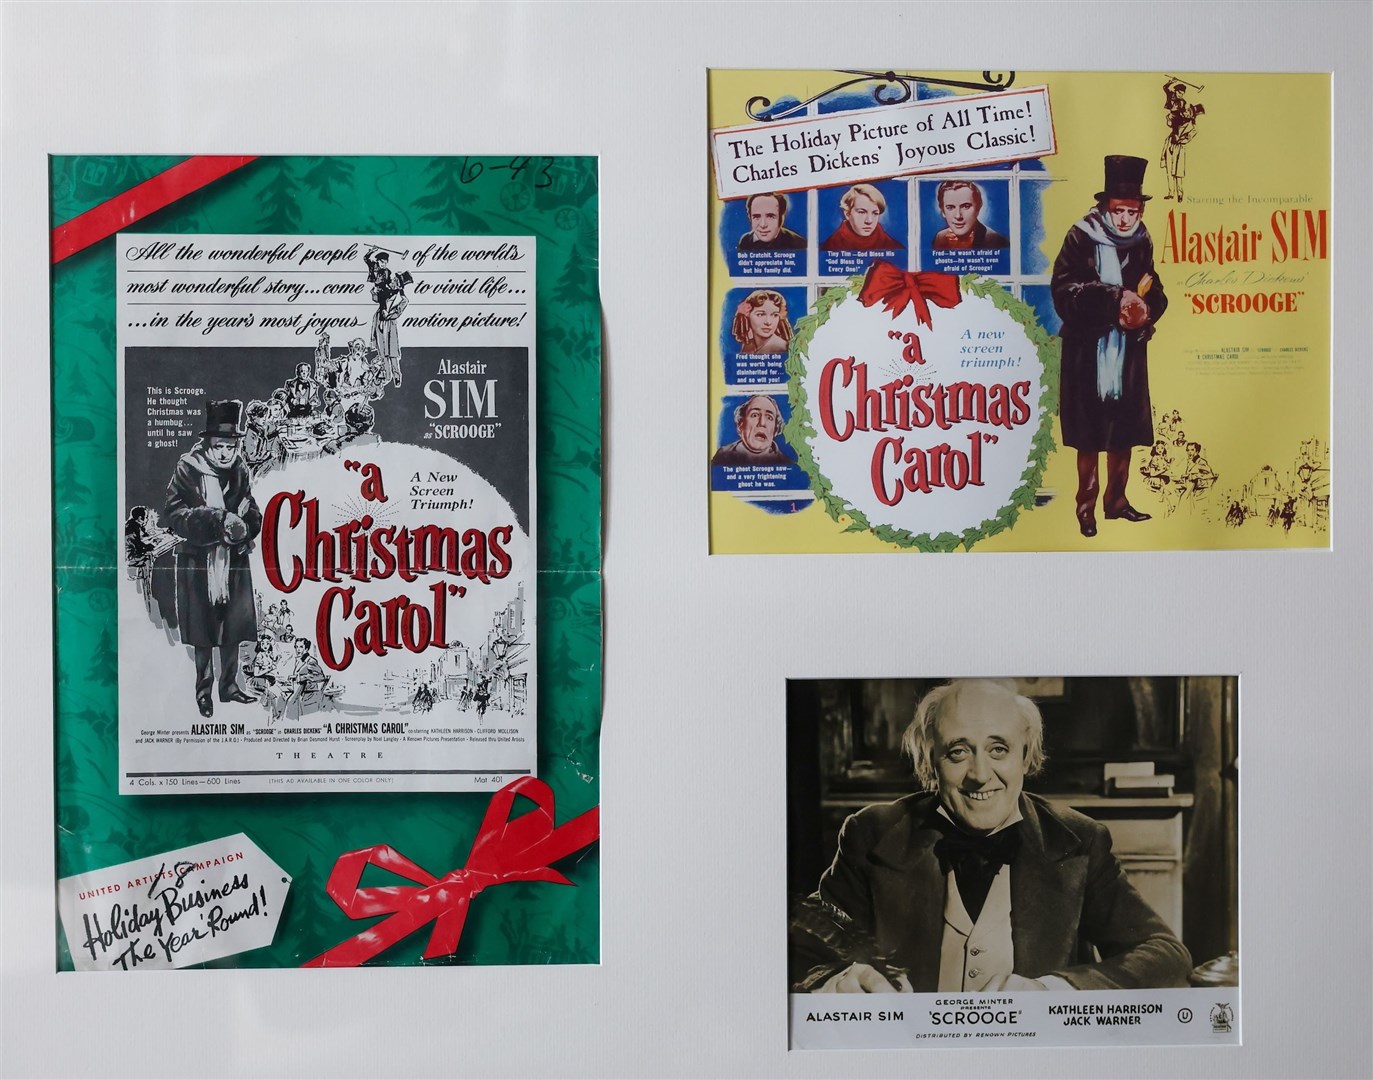 A selection of posters and an image relating to Scrooge, which was directed by Brian Desmond Hurst (Press Eye/PA)